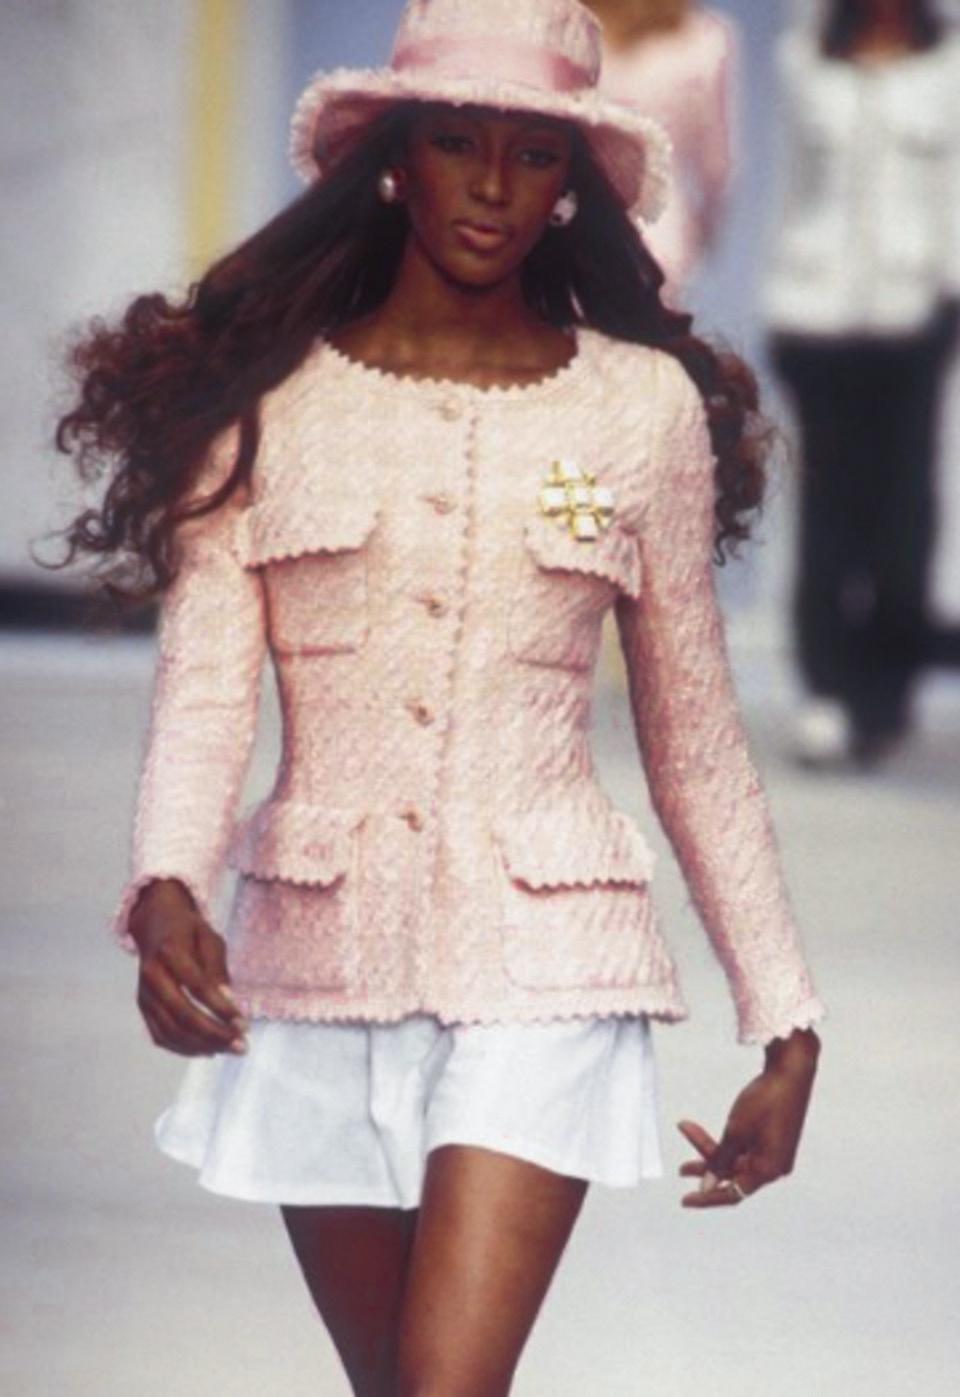 This exceedingly rare pink tweed jacket, part of Chanel's 1993 Spring/Summer collection, is a true artifact of fashion history. Worn by none other than Naomi Campbell, it epitomizes the aesthetic of 1990s fashion. Crafted from fantasy tweed in a